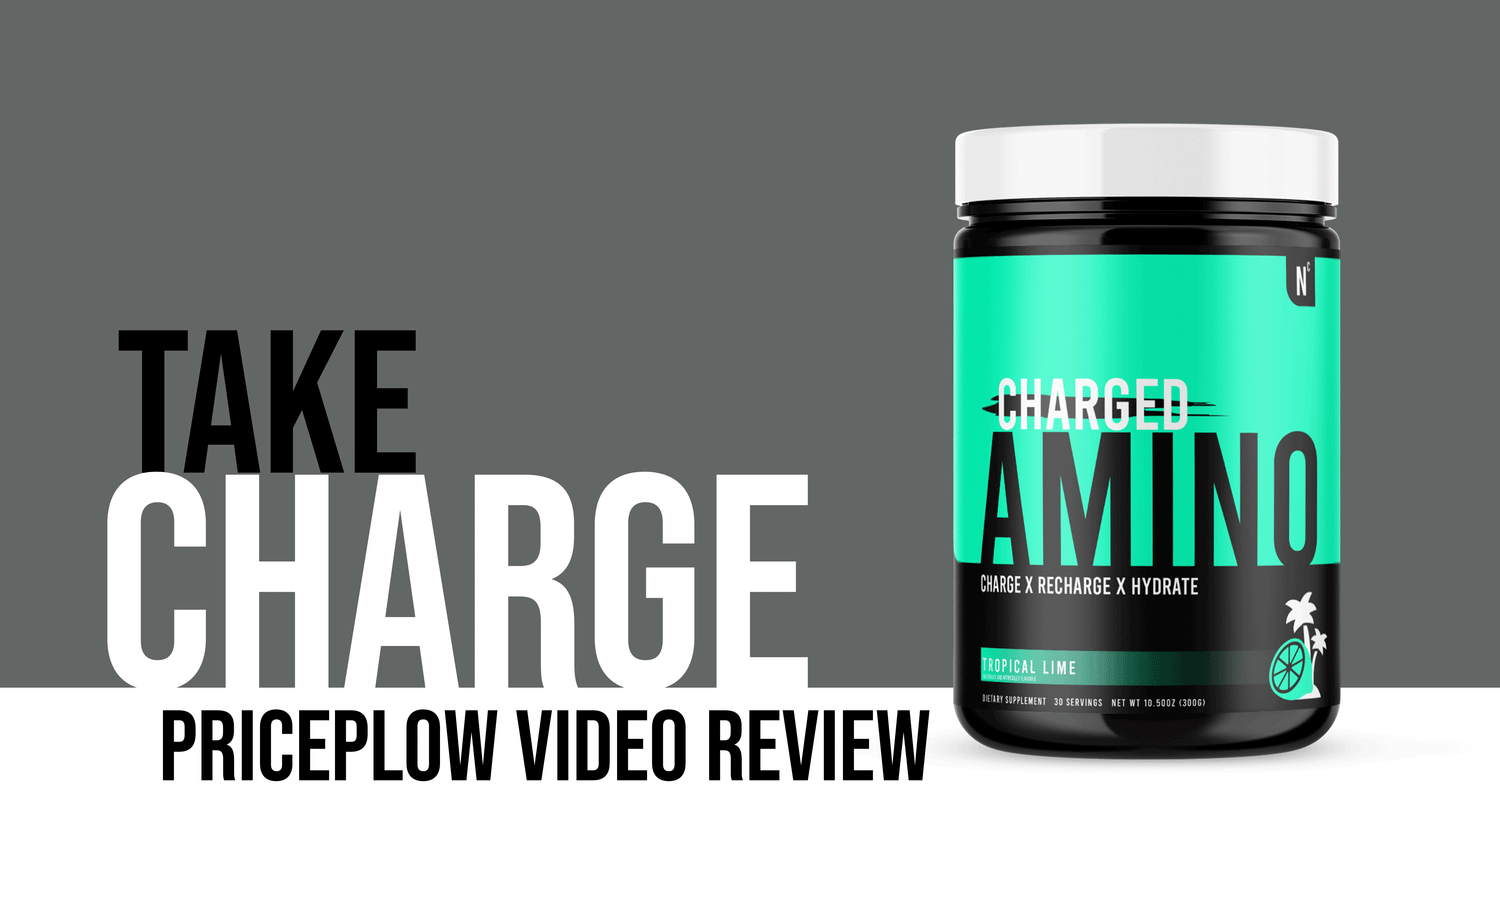 Charged Amino Review by Priceplow